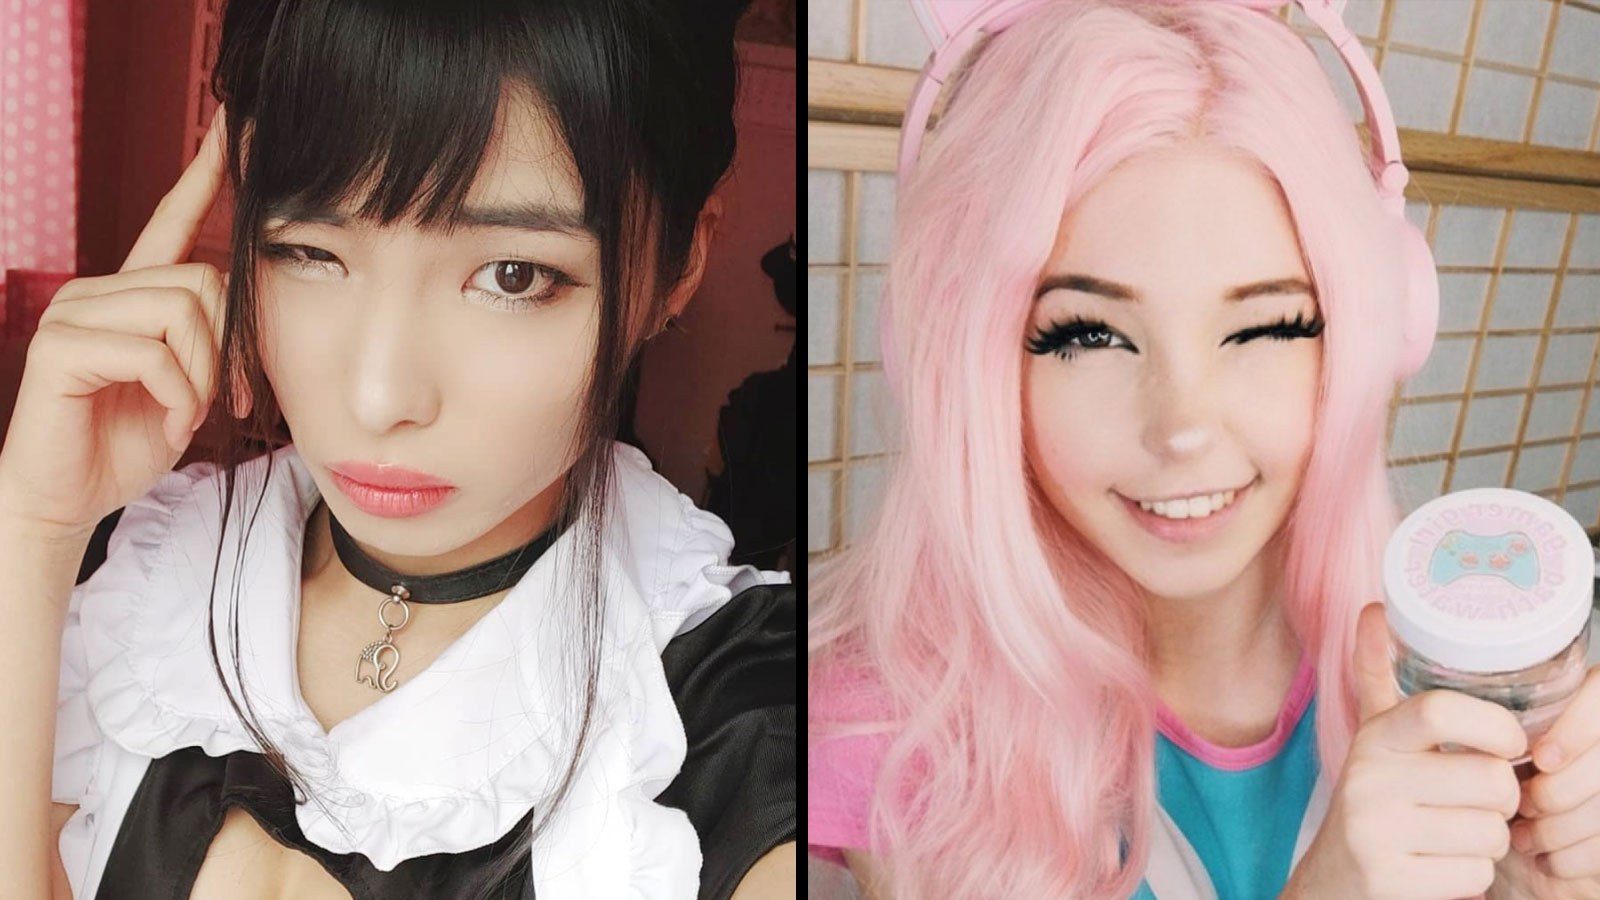 Belle Delphine gained notoriety after selling jars of her bath water - Belle  - PopBuzz